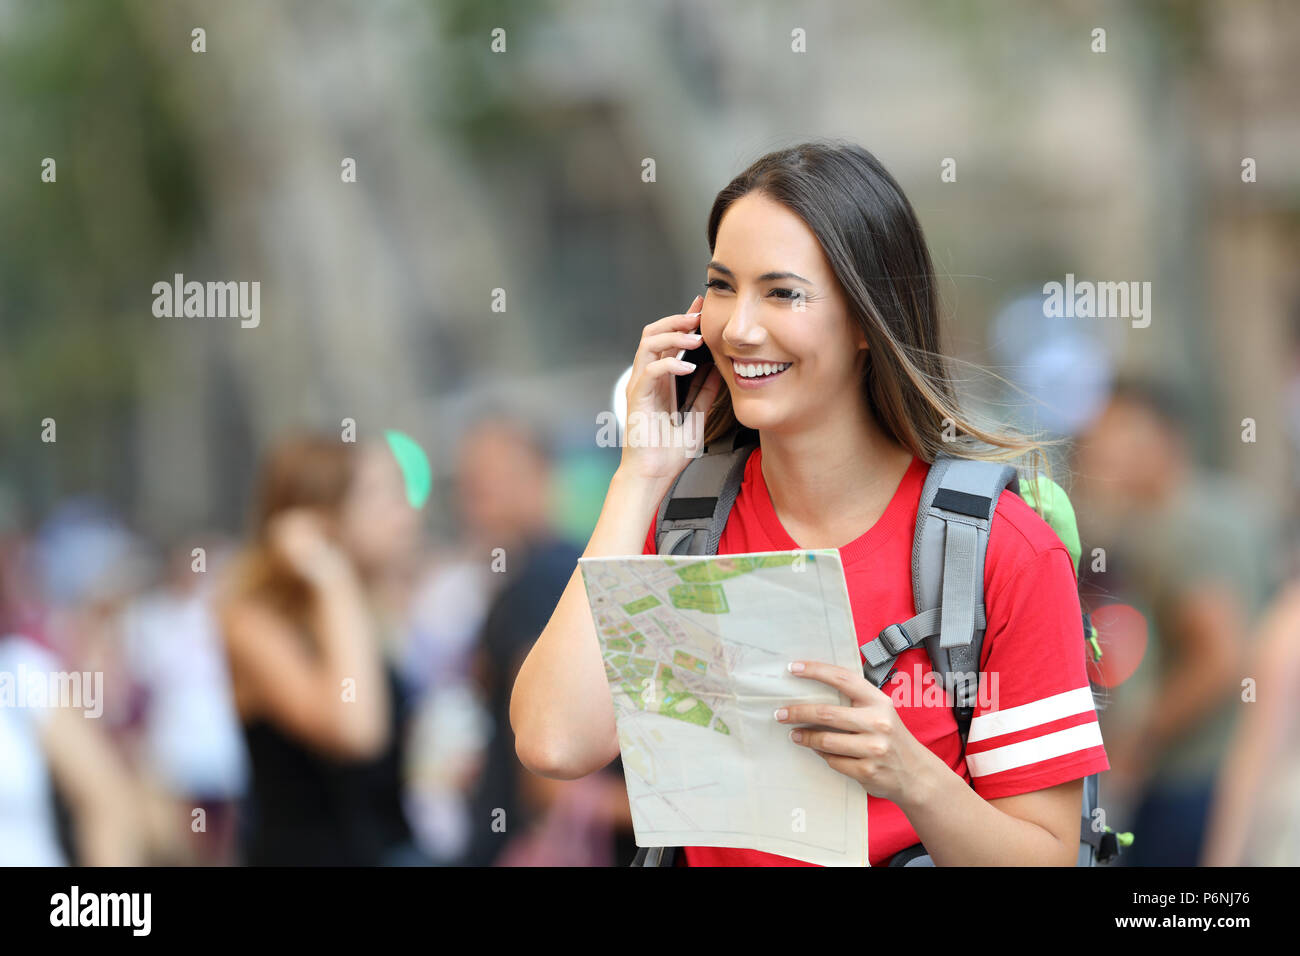 Happy teen tourist talking on phone holding a map walking on the street Stock Photo